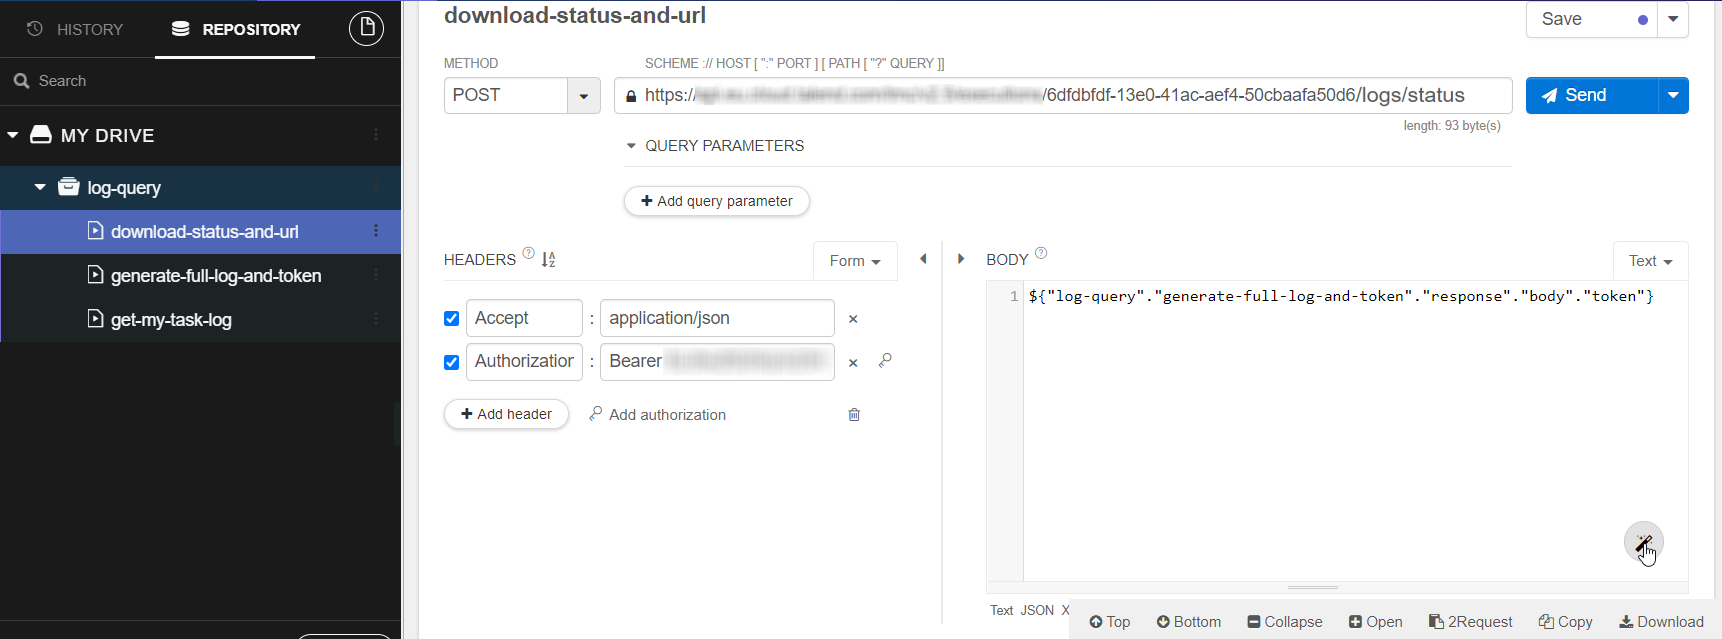 On Talend Cloud API Tester, the saved request appears in the body.